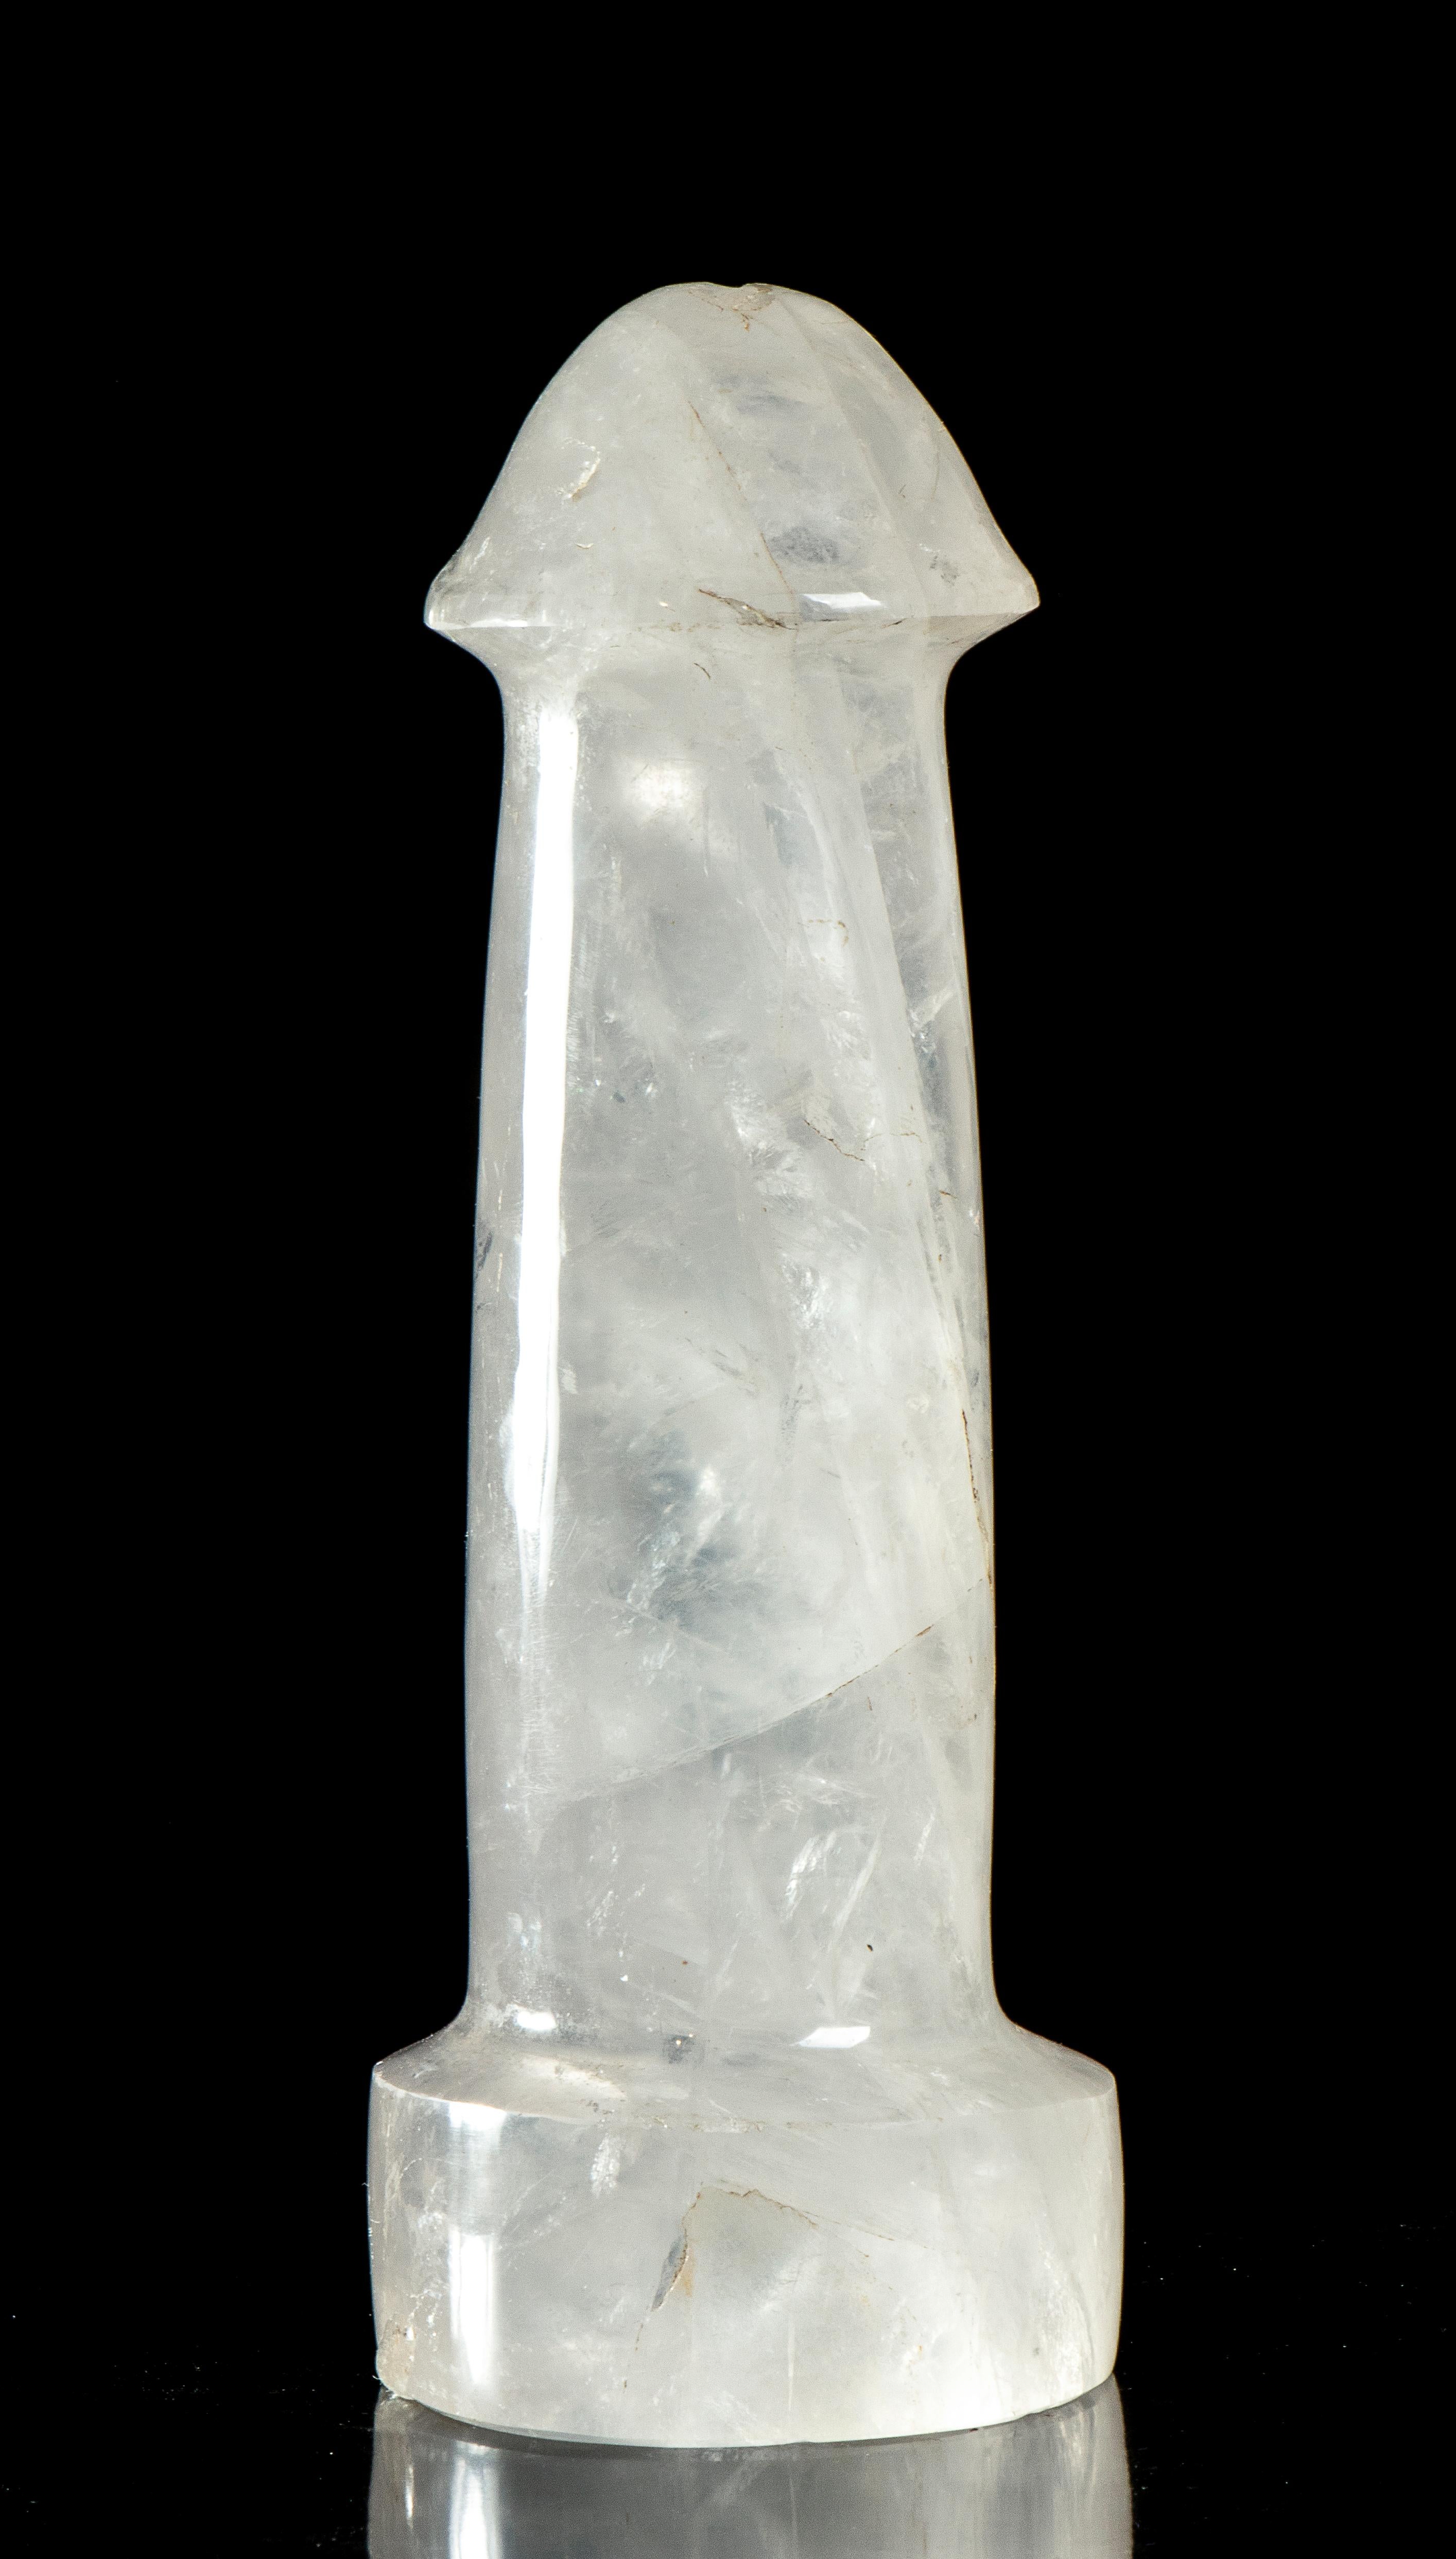 an impressive and unique sculpture of Phallus, hand carved in the semiprecious stone Rock crystal. from the ancient Egypt until modern time Phallus sculptures played an important role in the cult of Osiris in ancient Egyptian religion. When Osiris'